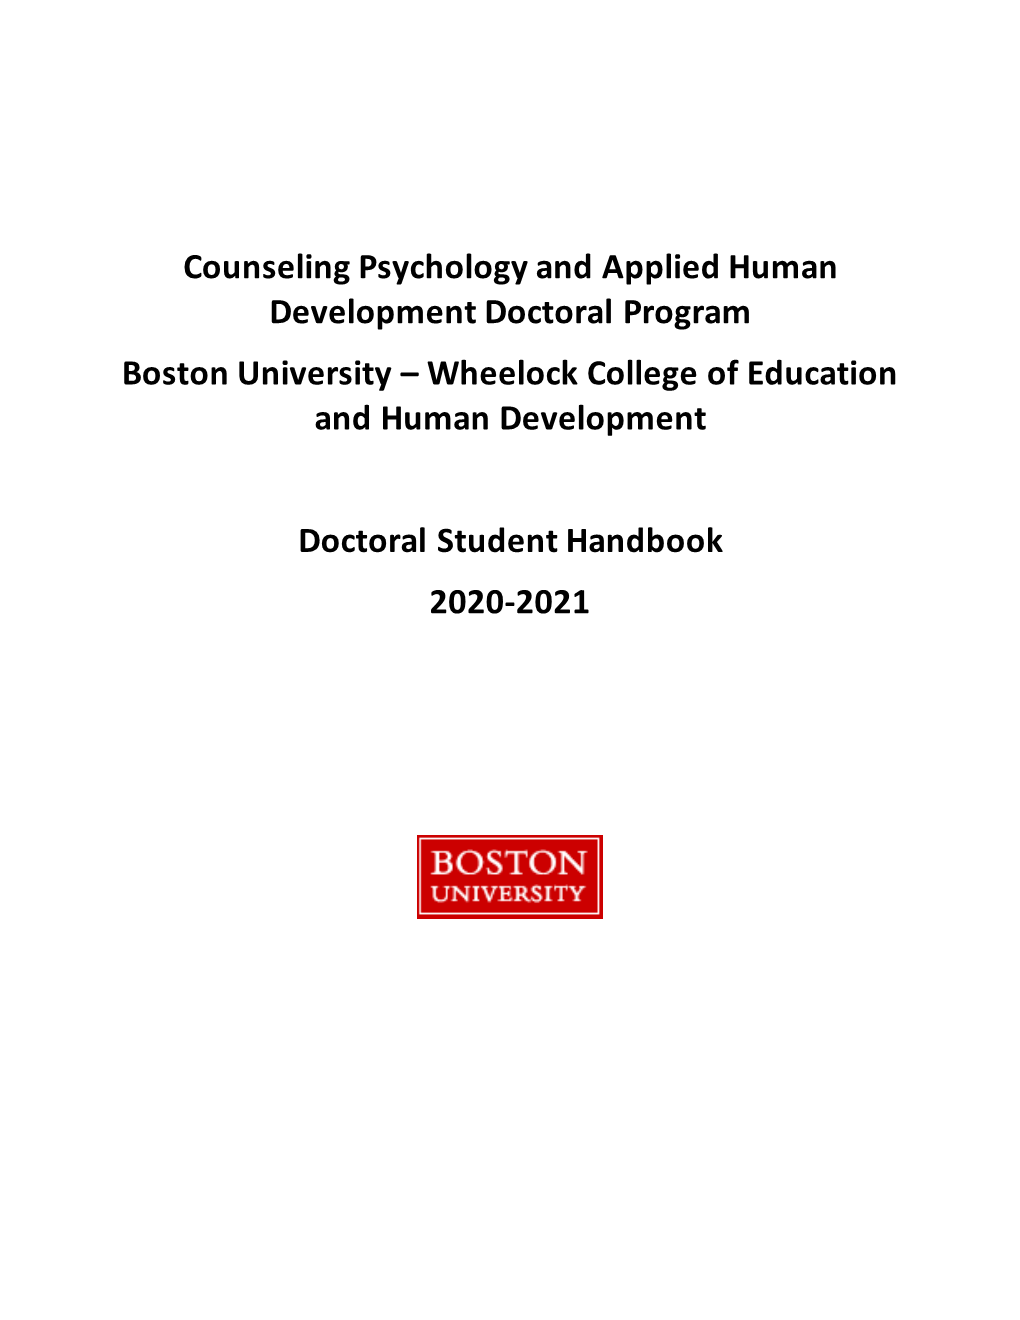 Counseling Psychology and Applied Human Development Doctoral Program Boston University – Wheelock College of Education and Human Development